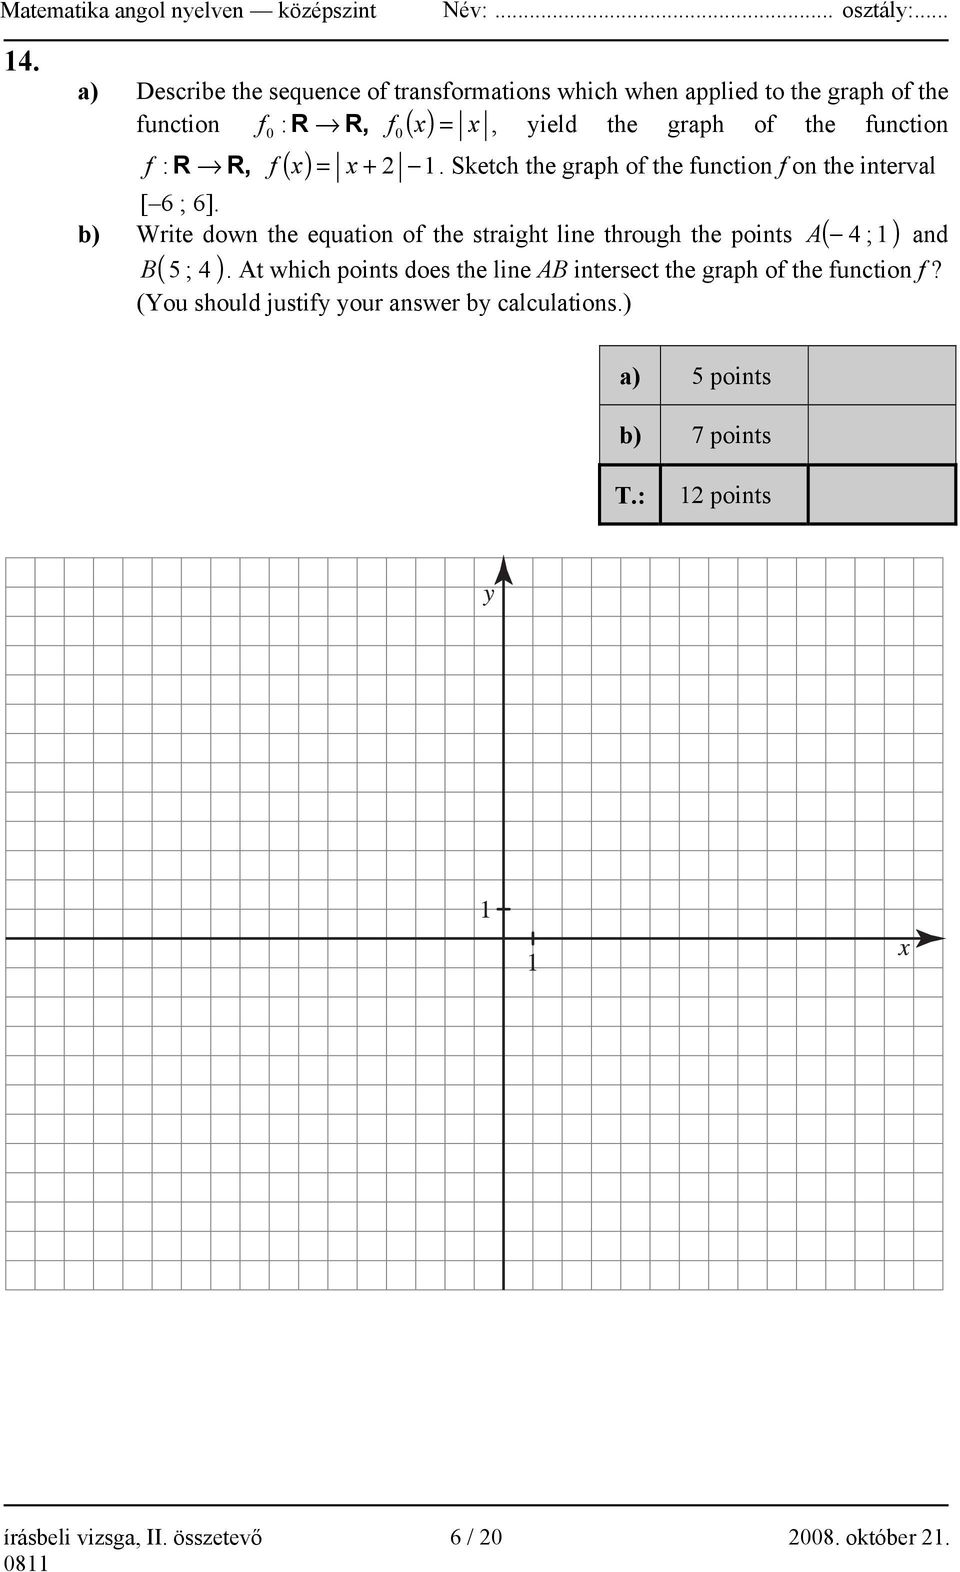 At which points does the line AB intersect the graph of the function f? (You should justify your answer by calculations.